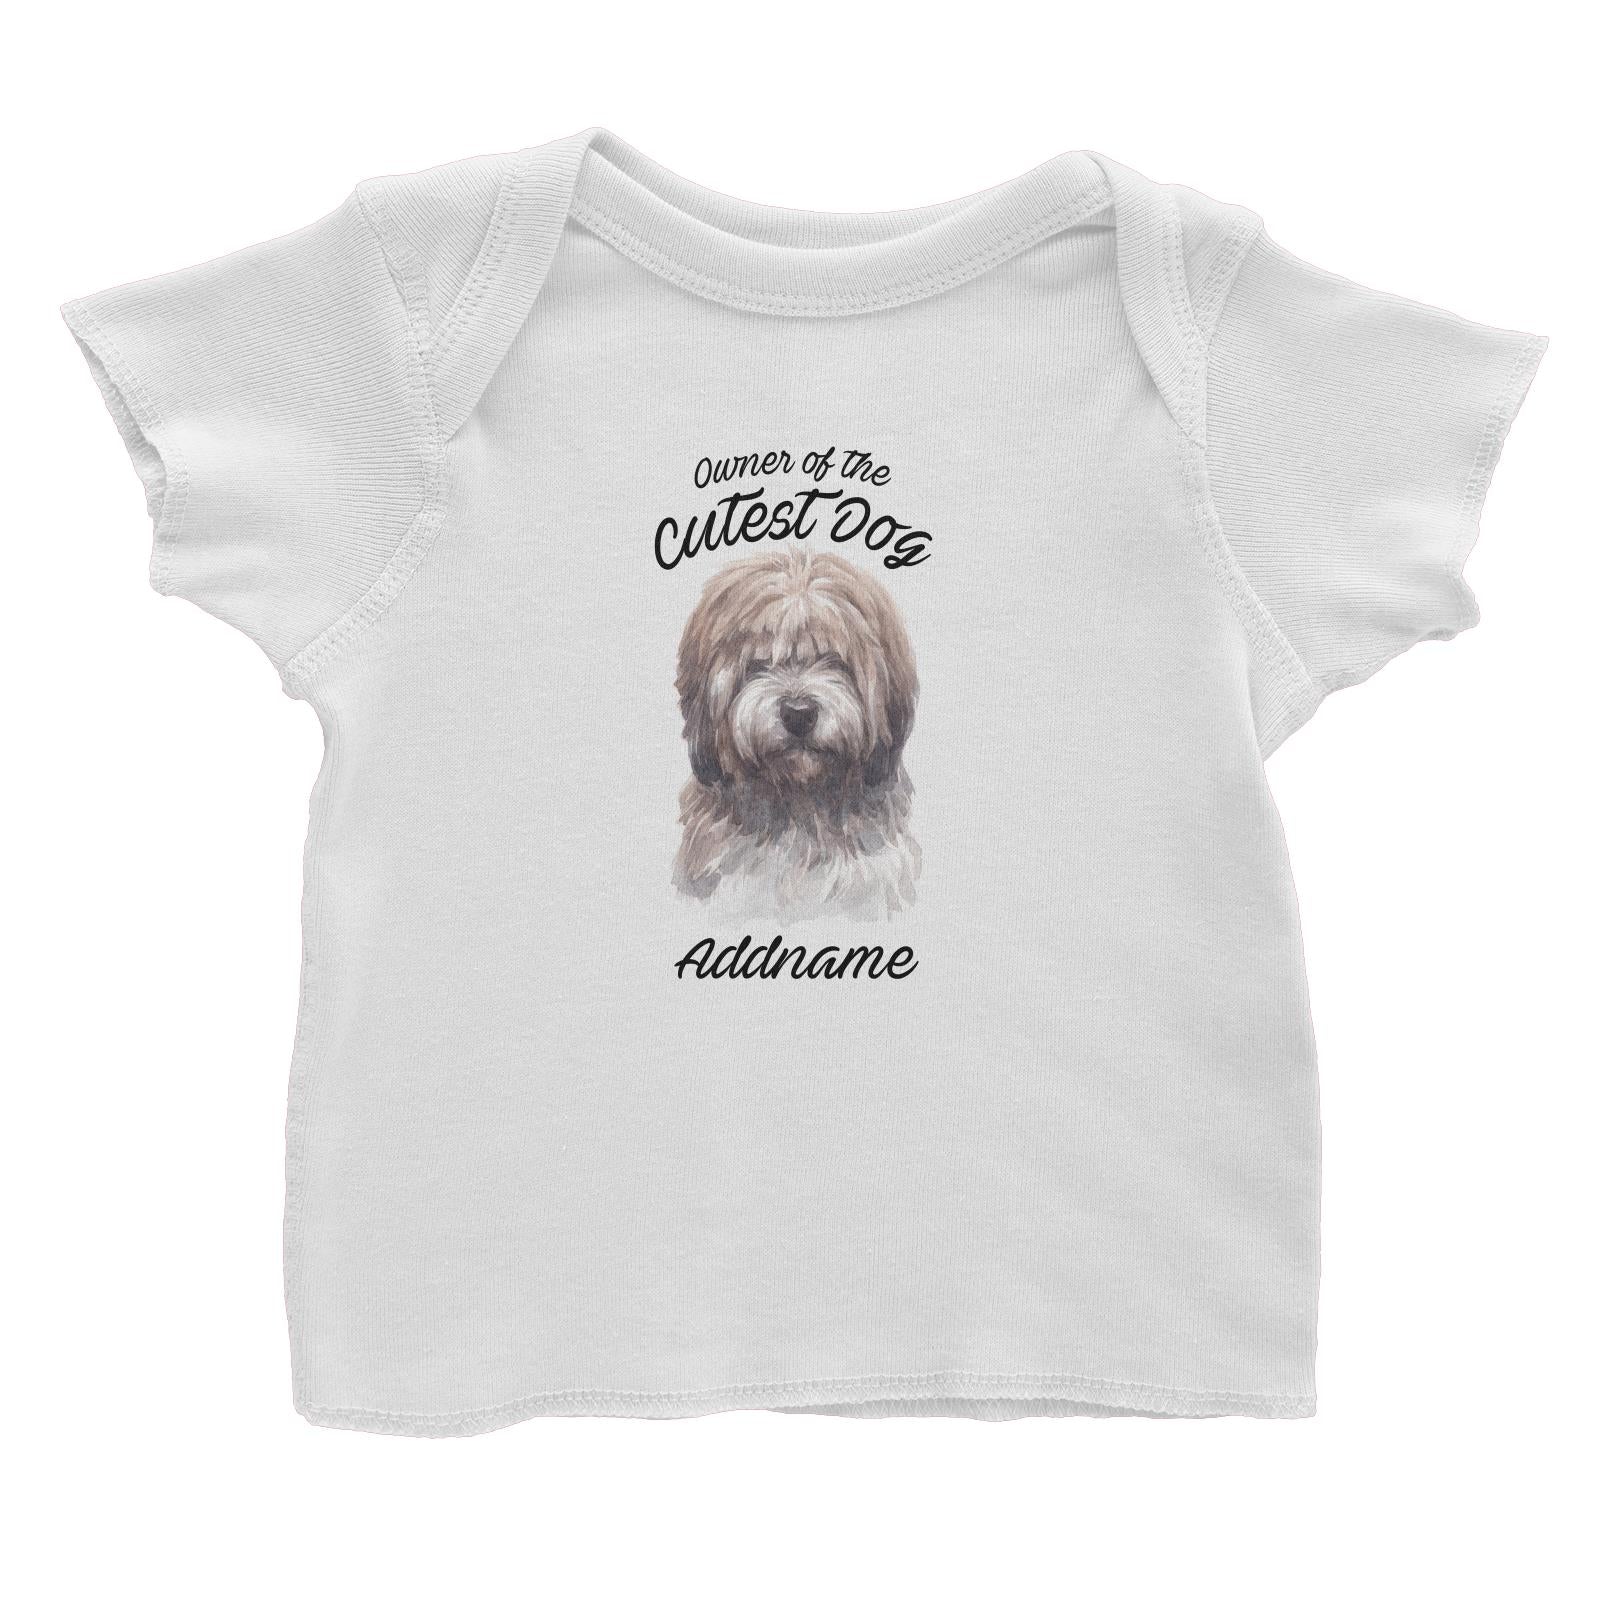 Watercolor Dog Owner Of The Cutest Dog Tibetan Addname Baby T-Shirt